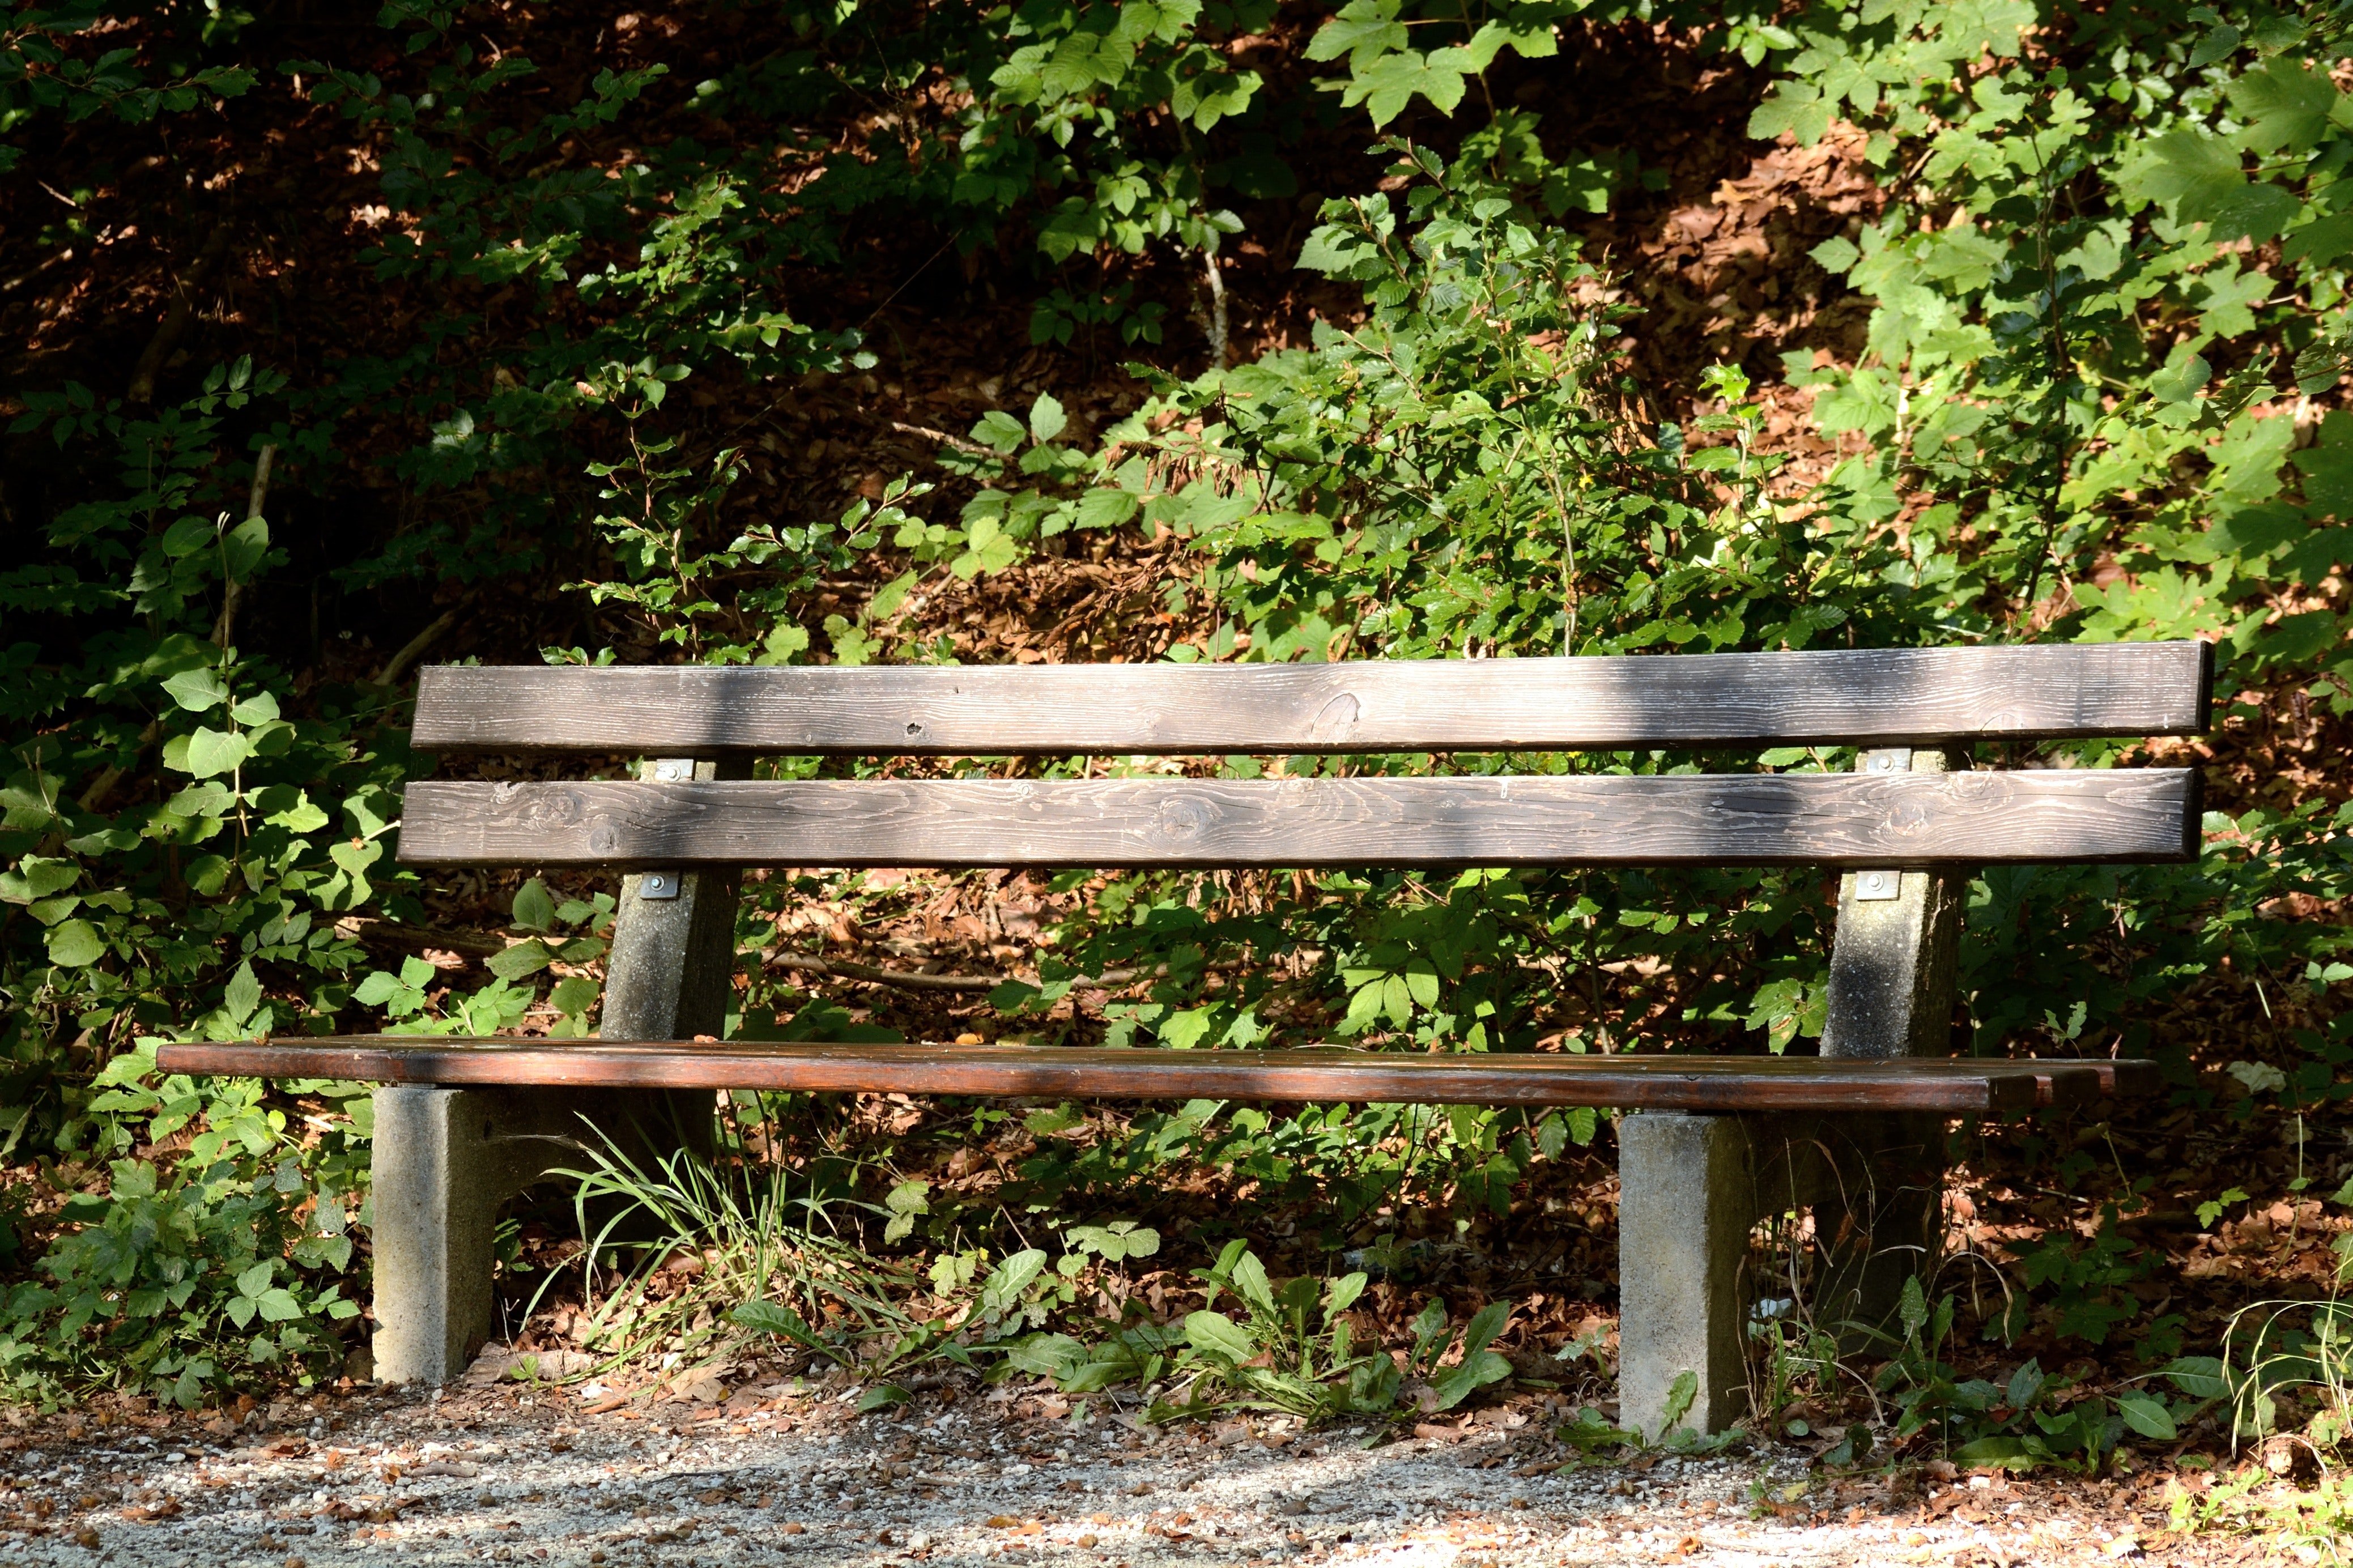 Linda and Laura found a bench nearby | Source: Pexels